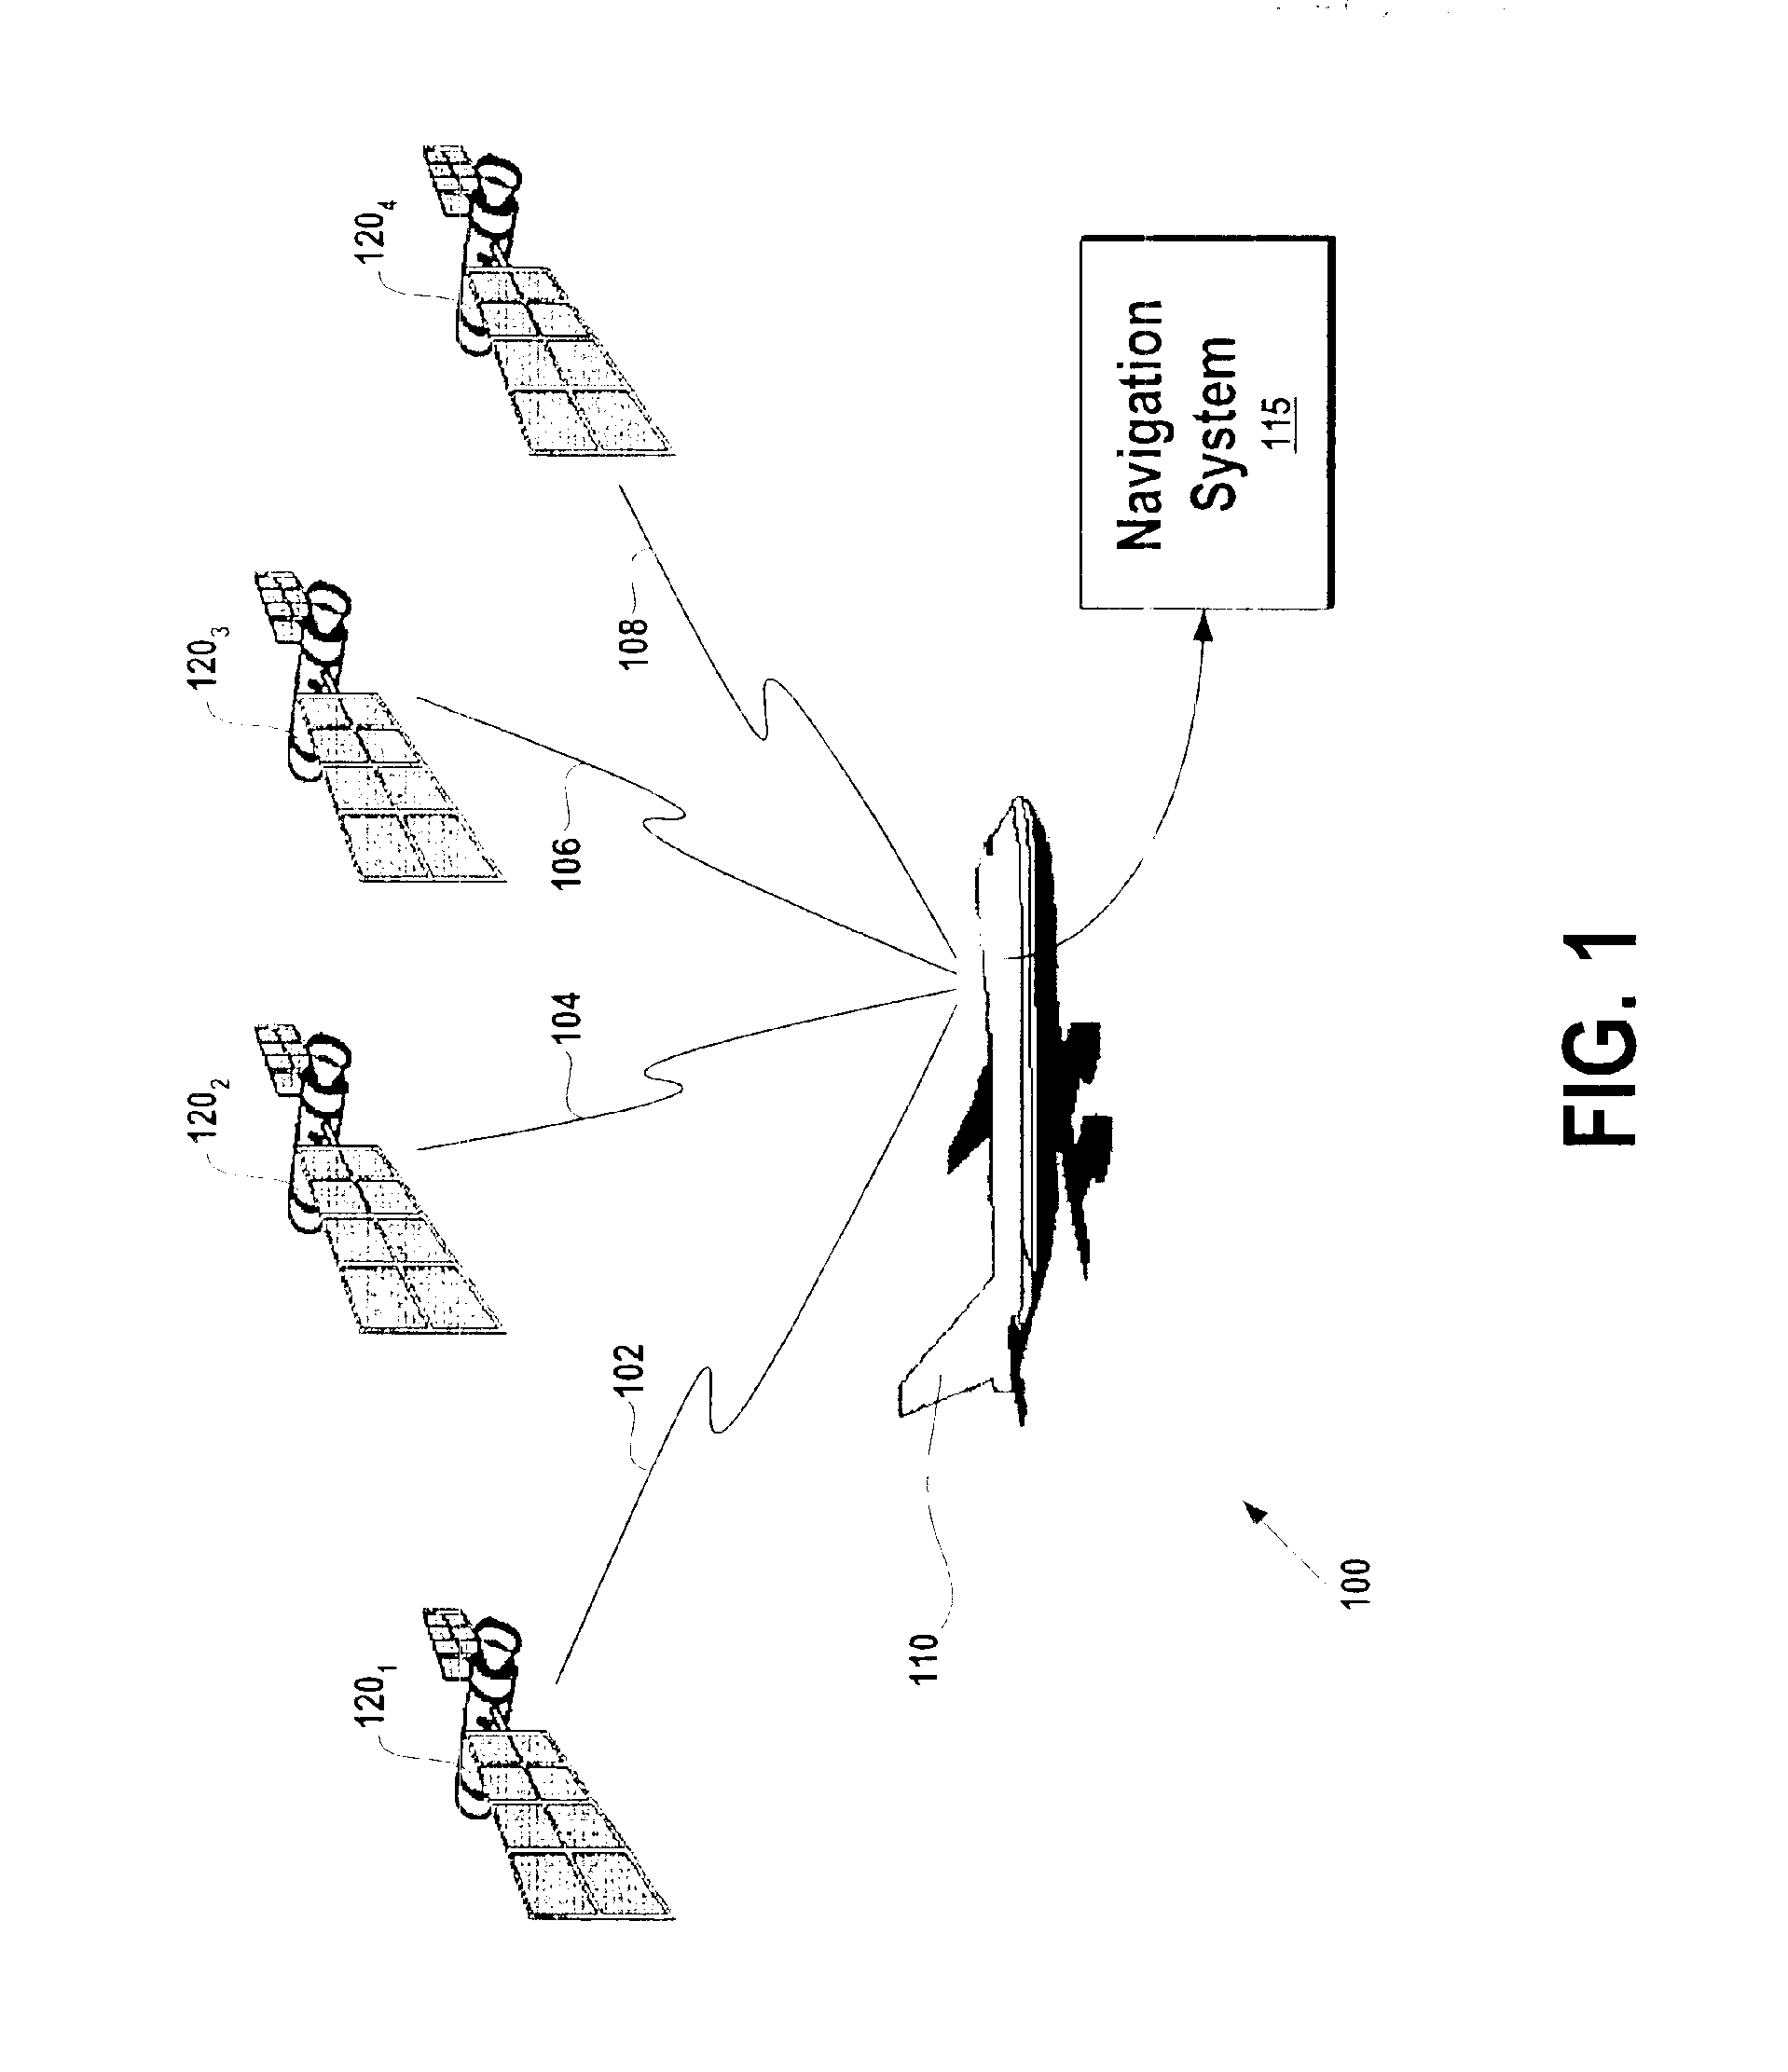 Systems and methods for fault detection and exclusion in navigational systems